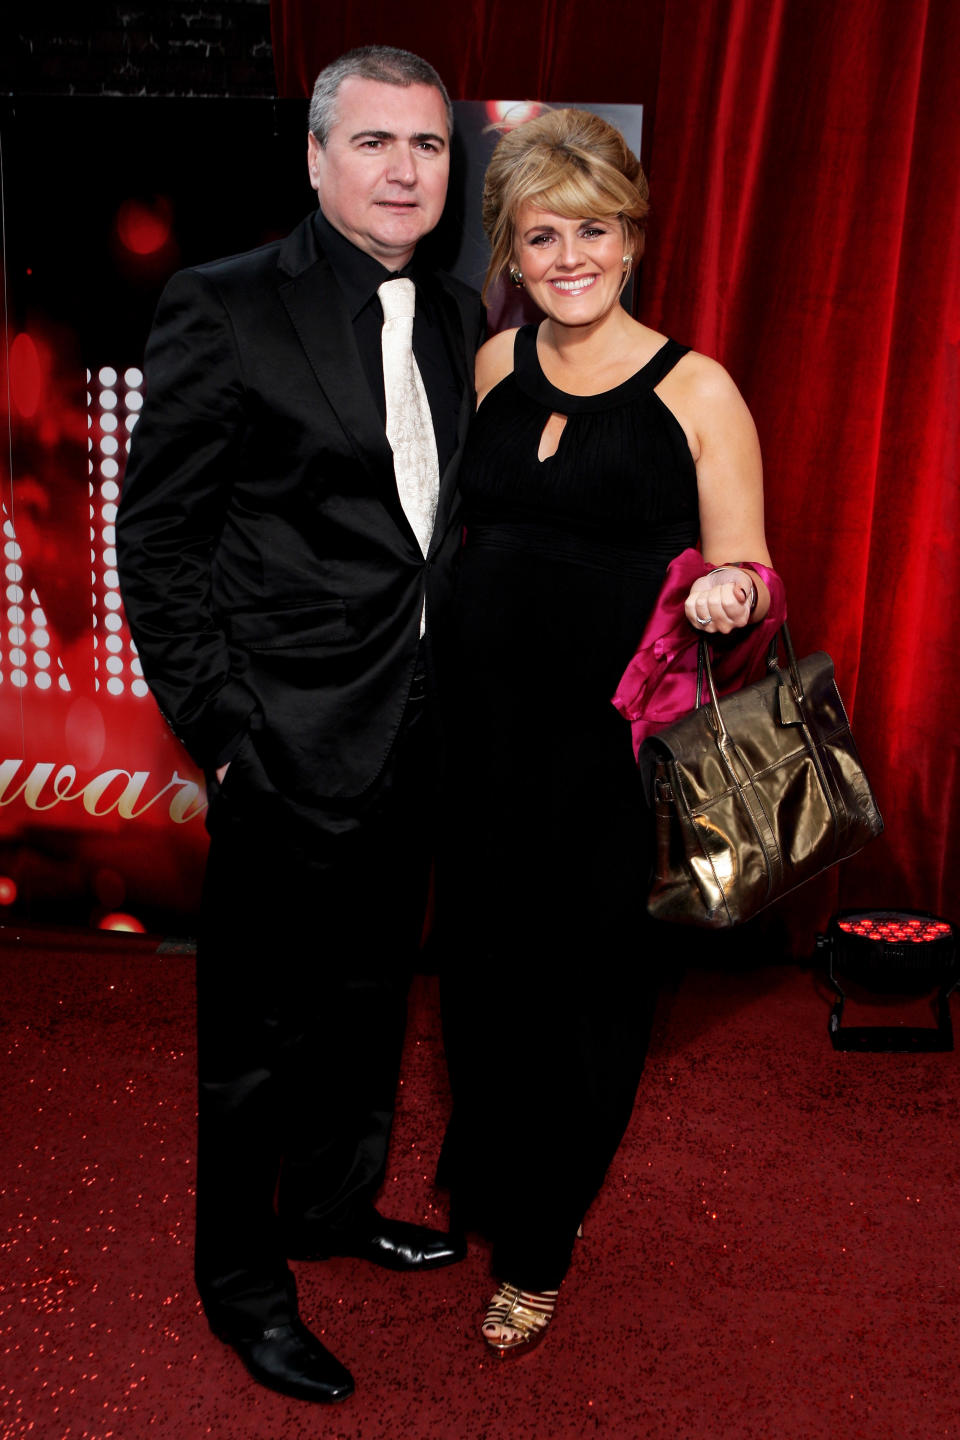 LONDON, ENGLAND - MAY 08:  Sally Lindsay and Steve White attends the British Soap Awards at The London Television Centre on May 8, 2010 in London, England.  (Photo by Mike Marsland/WireImage)